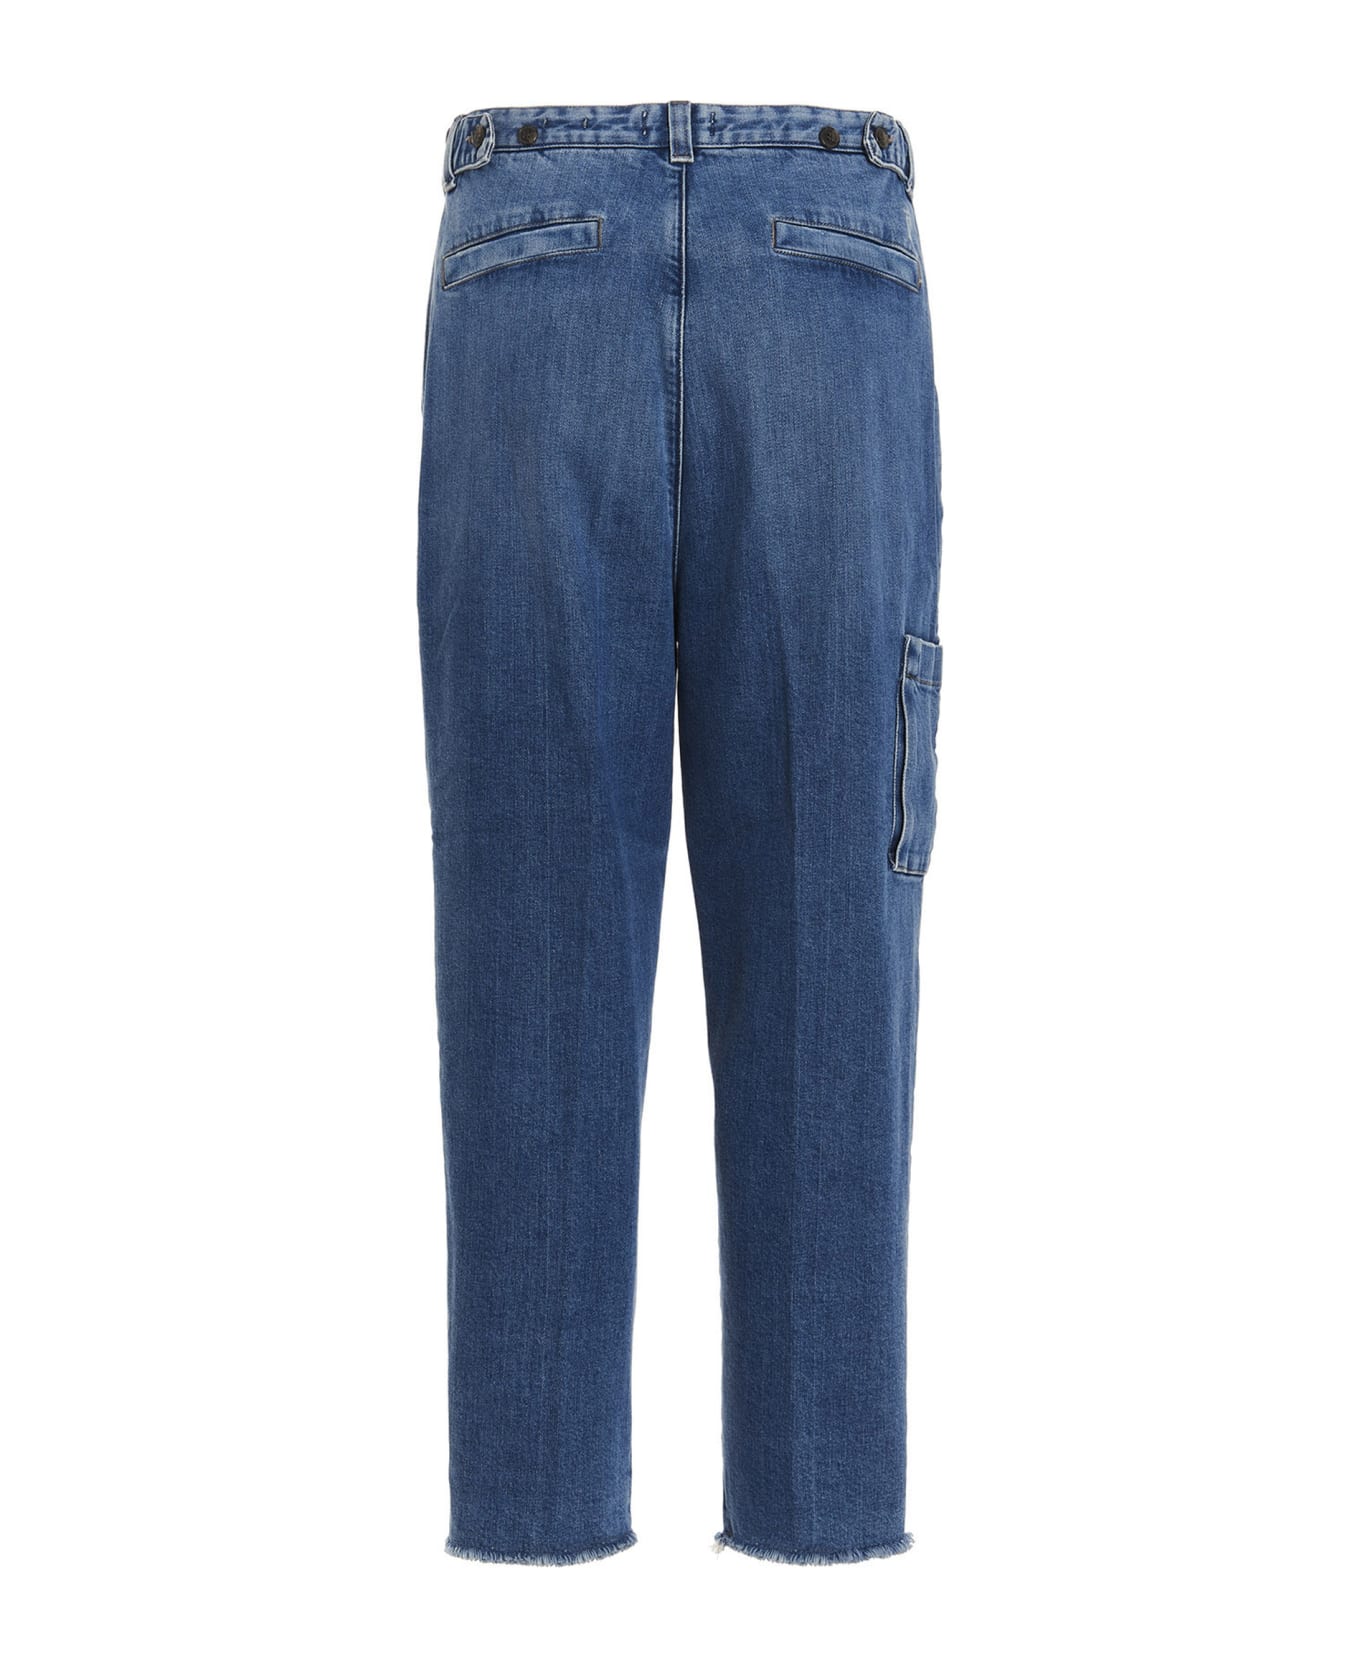 Closed 'dover 5' Jeans - Blue デニム